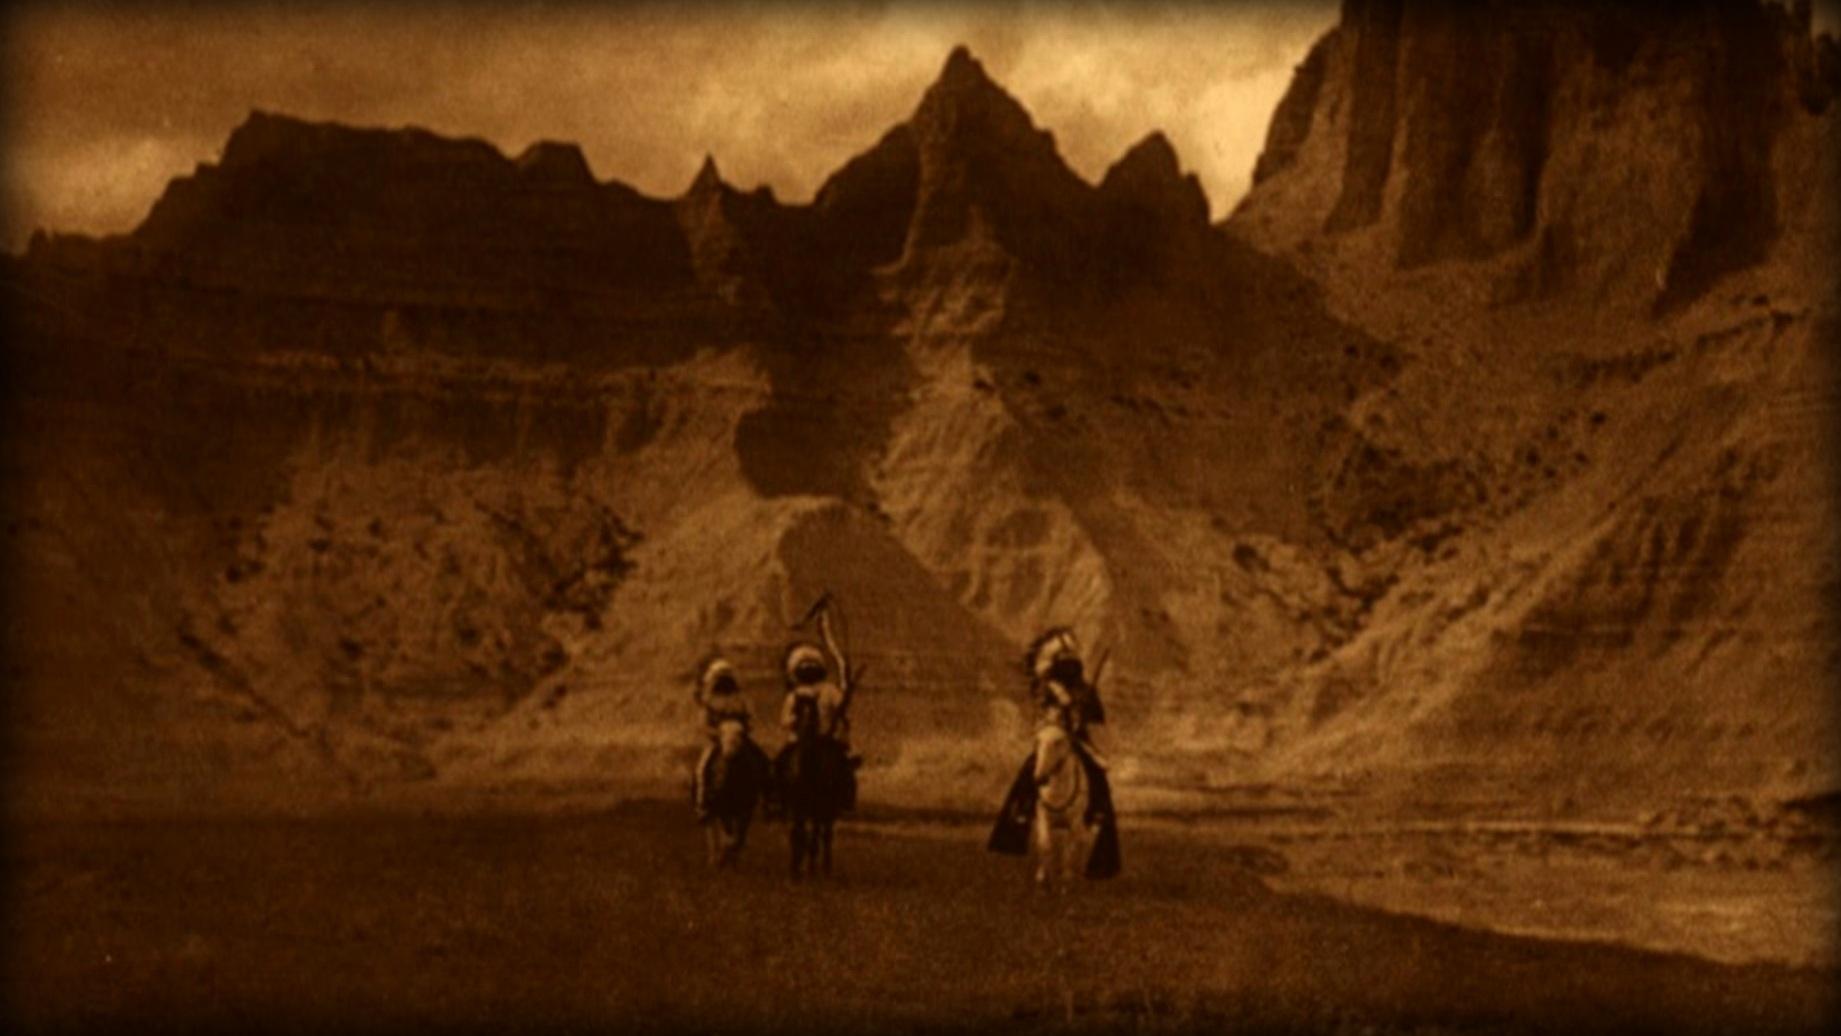 Archival image of three Native Americans riding horses in the Badlands. 